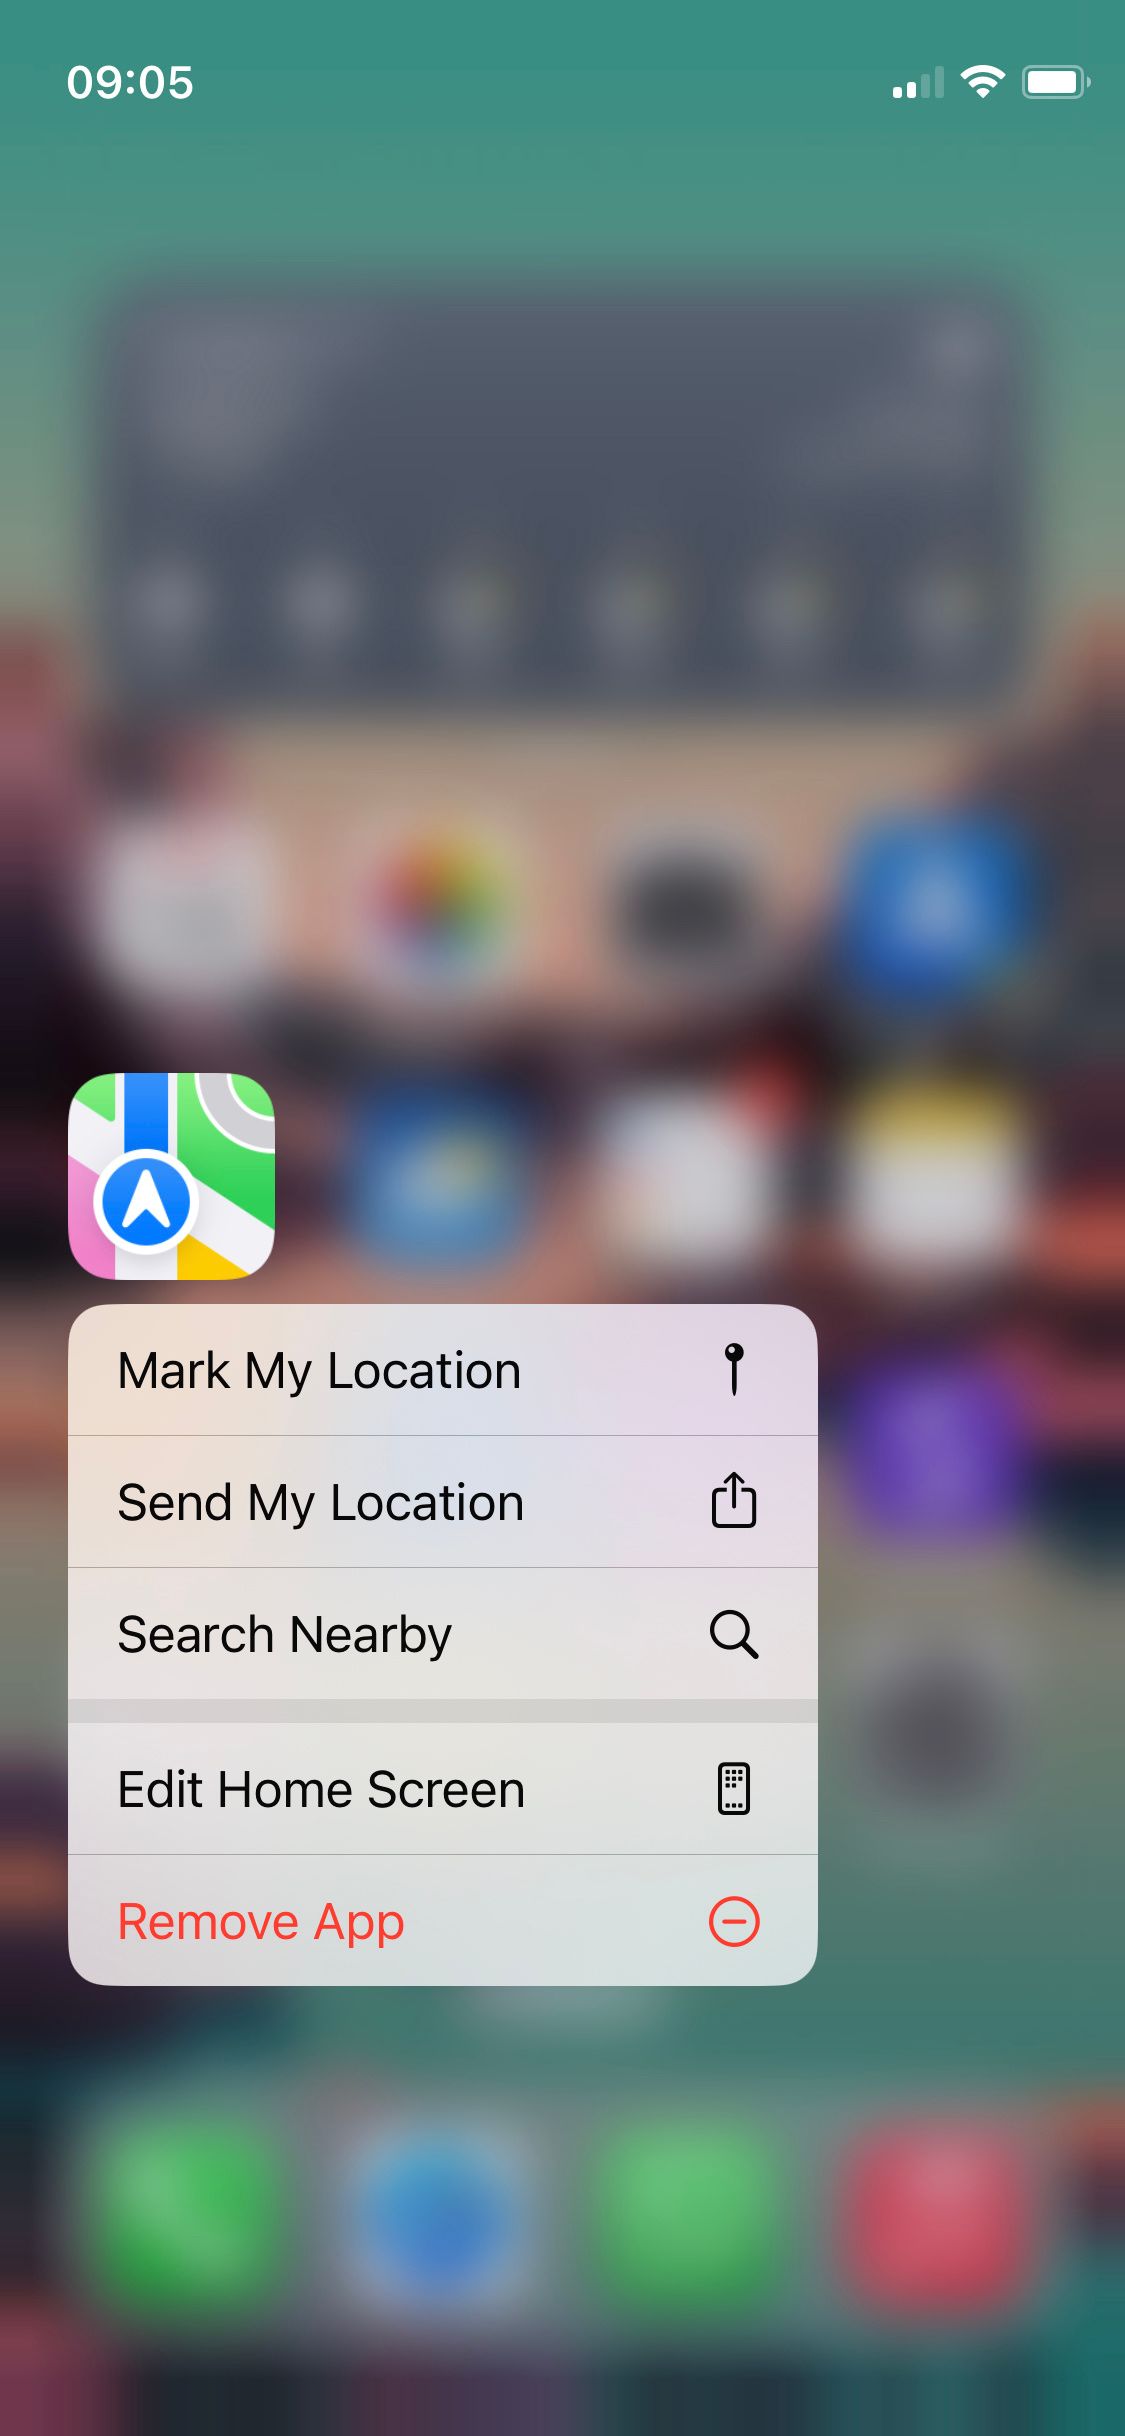 App quick action menu on iPhone Home Screen